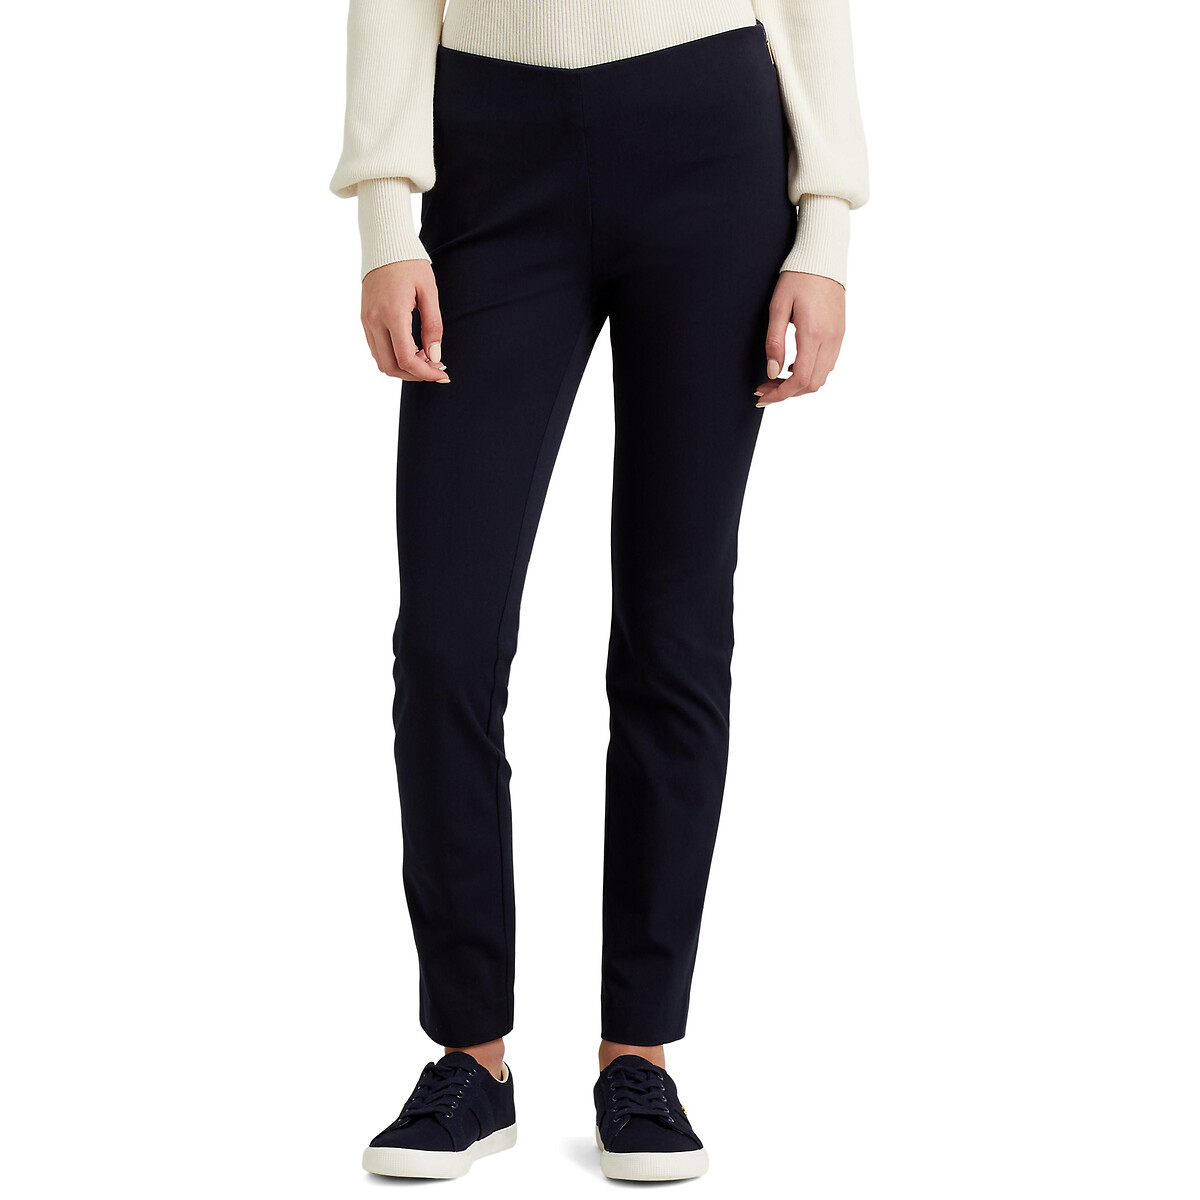 Navy Stretch Twill Skinny Trousers  Women  George at ASDA